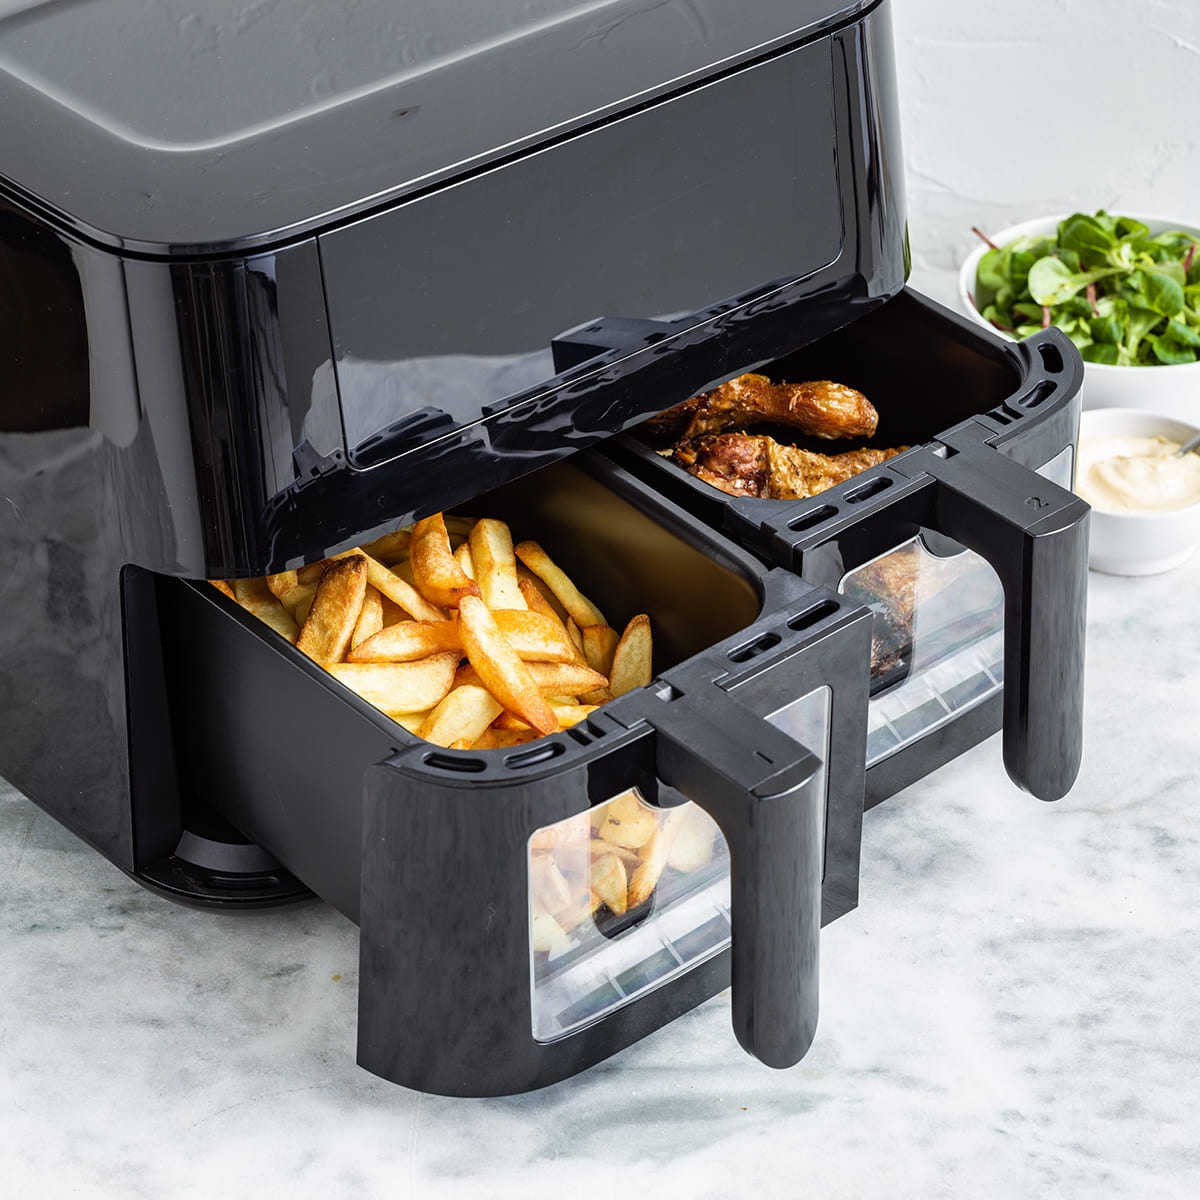 CC008077-001 - Air Fryer DUAL ZONE AIRFRYER - Product Image 2